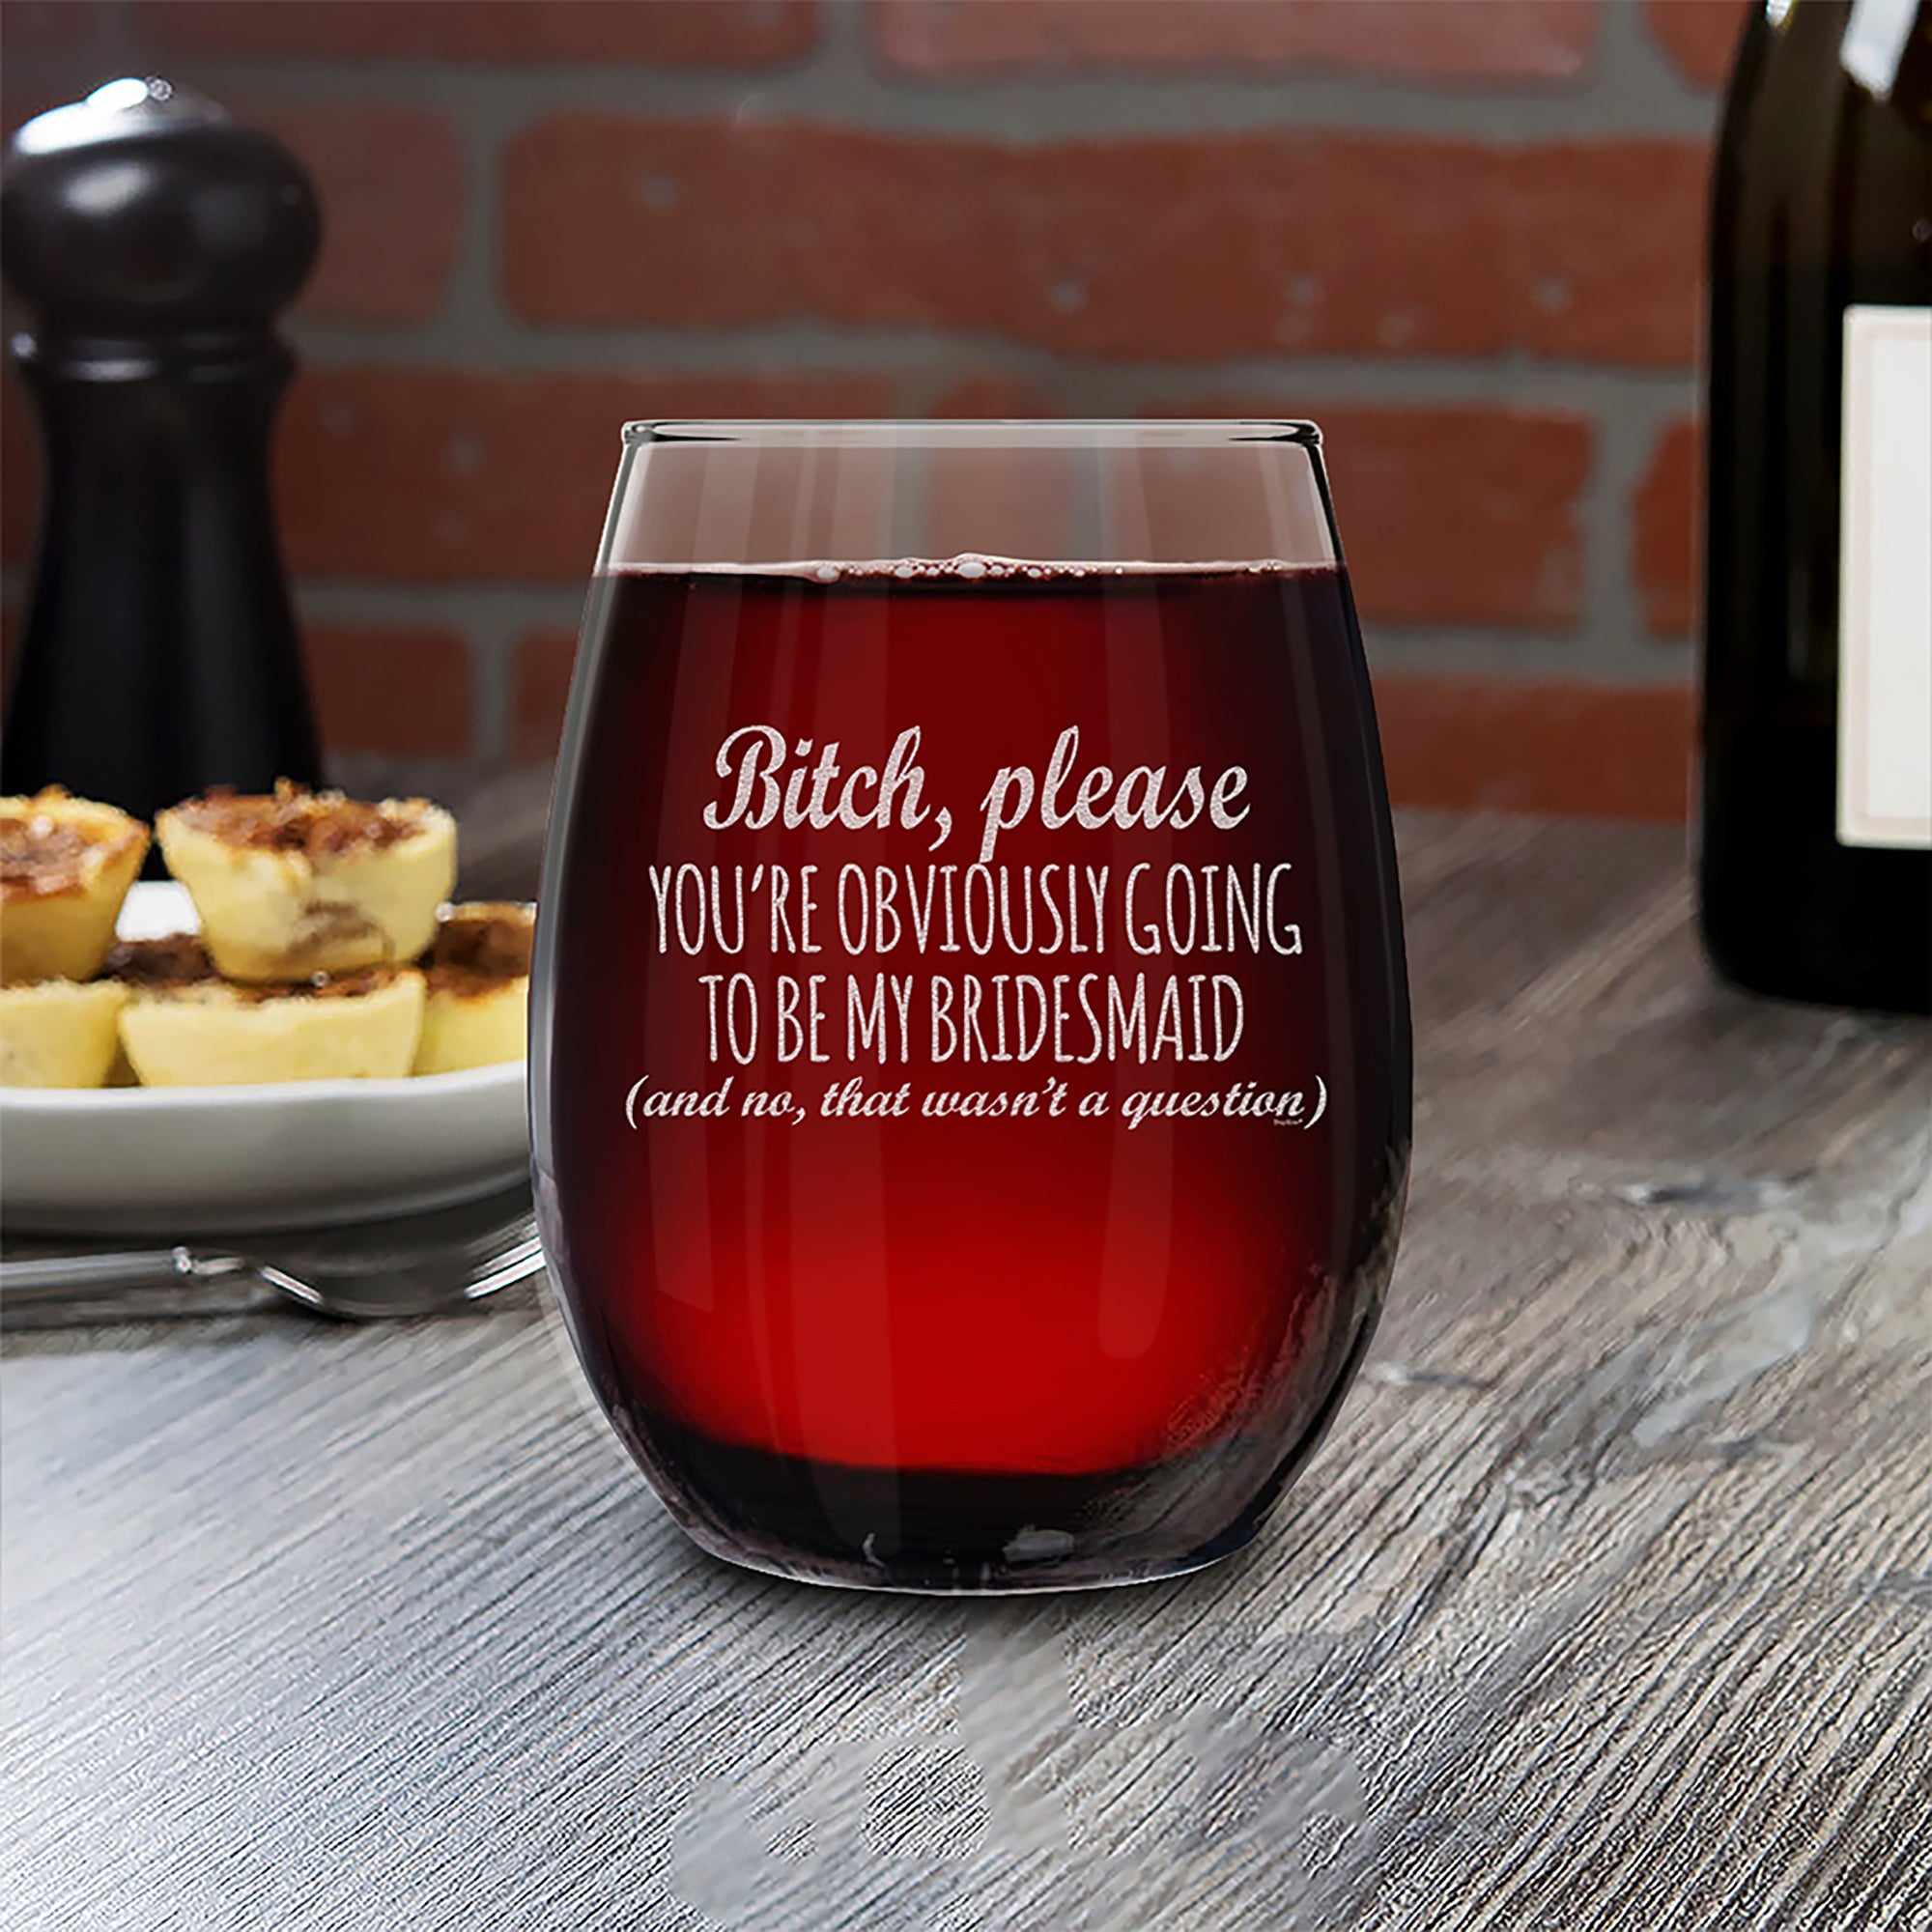 You're Obviously Going To Be My Bridesmaid (and no that wasn't a question) Laser Engraved Stemless Wine Glass Funny Bridesmaid Proposal Bachelorette Party Gifts